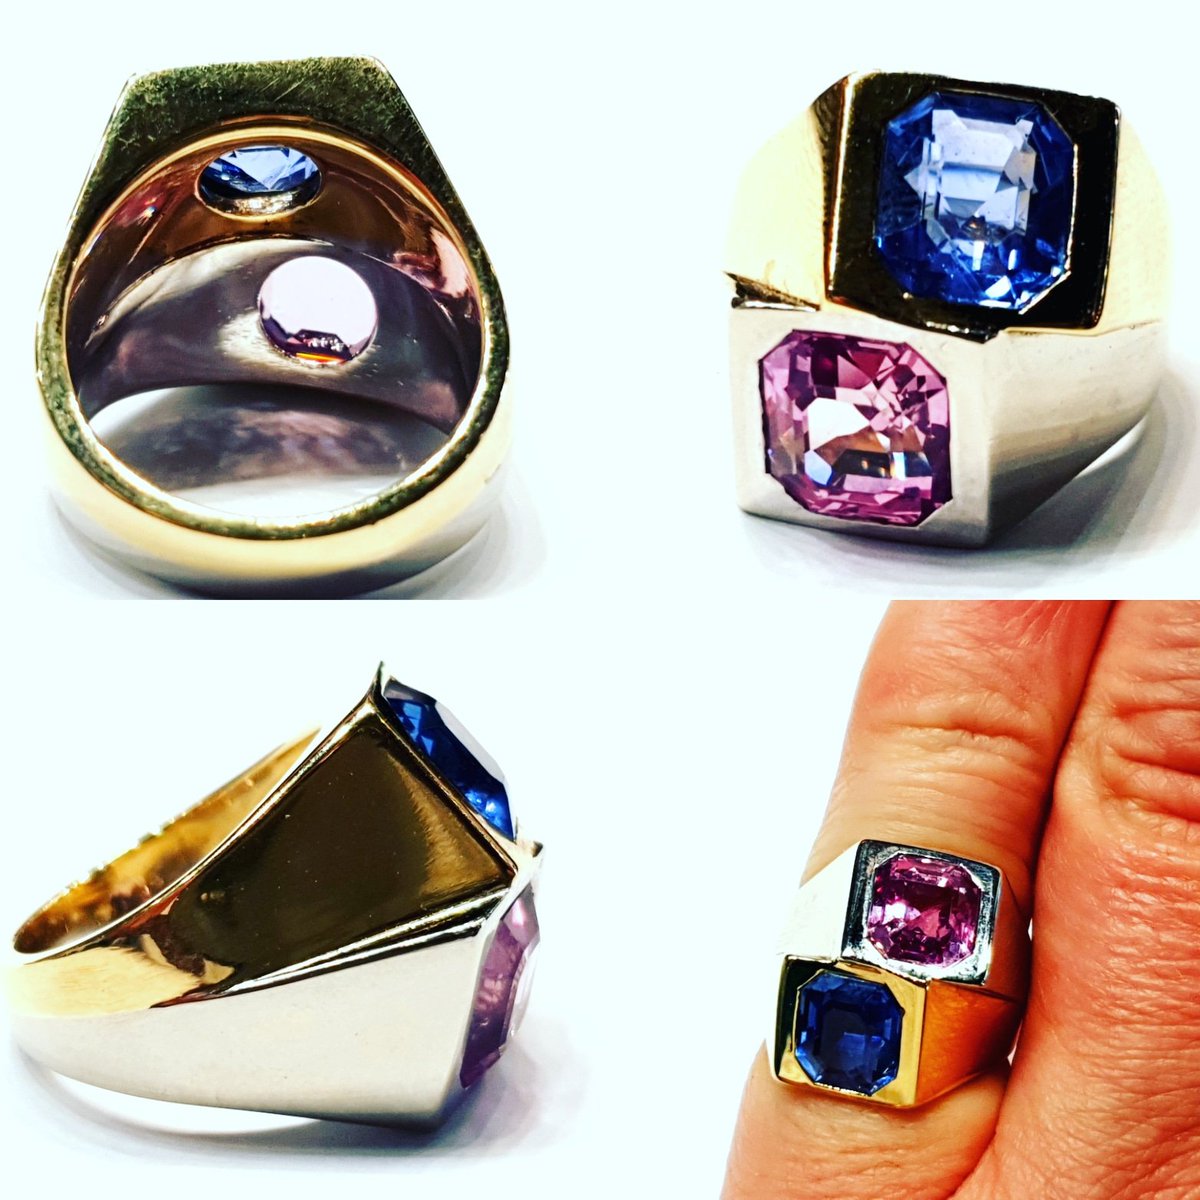 One ring 3ct natural pink sapphire and a 3ct cornflour blue natural sapphire set in gold and platinum #finejewelry #gemstone #knuckleduster #stylishjewellery #showmeyourrings
instagram.com/p/CFUc3eqlhZi/…